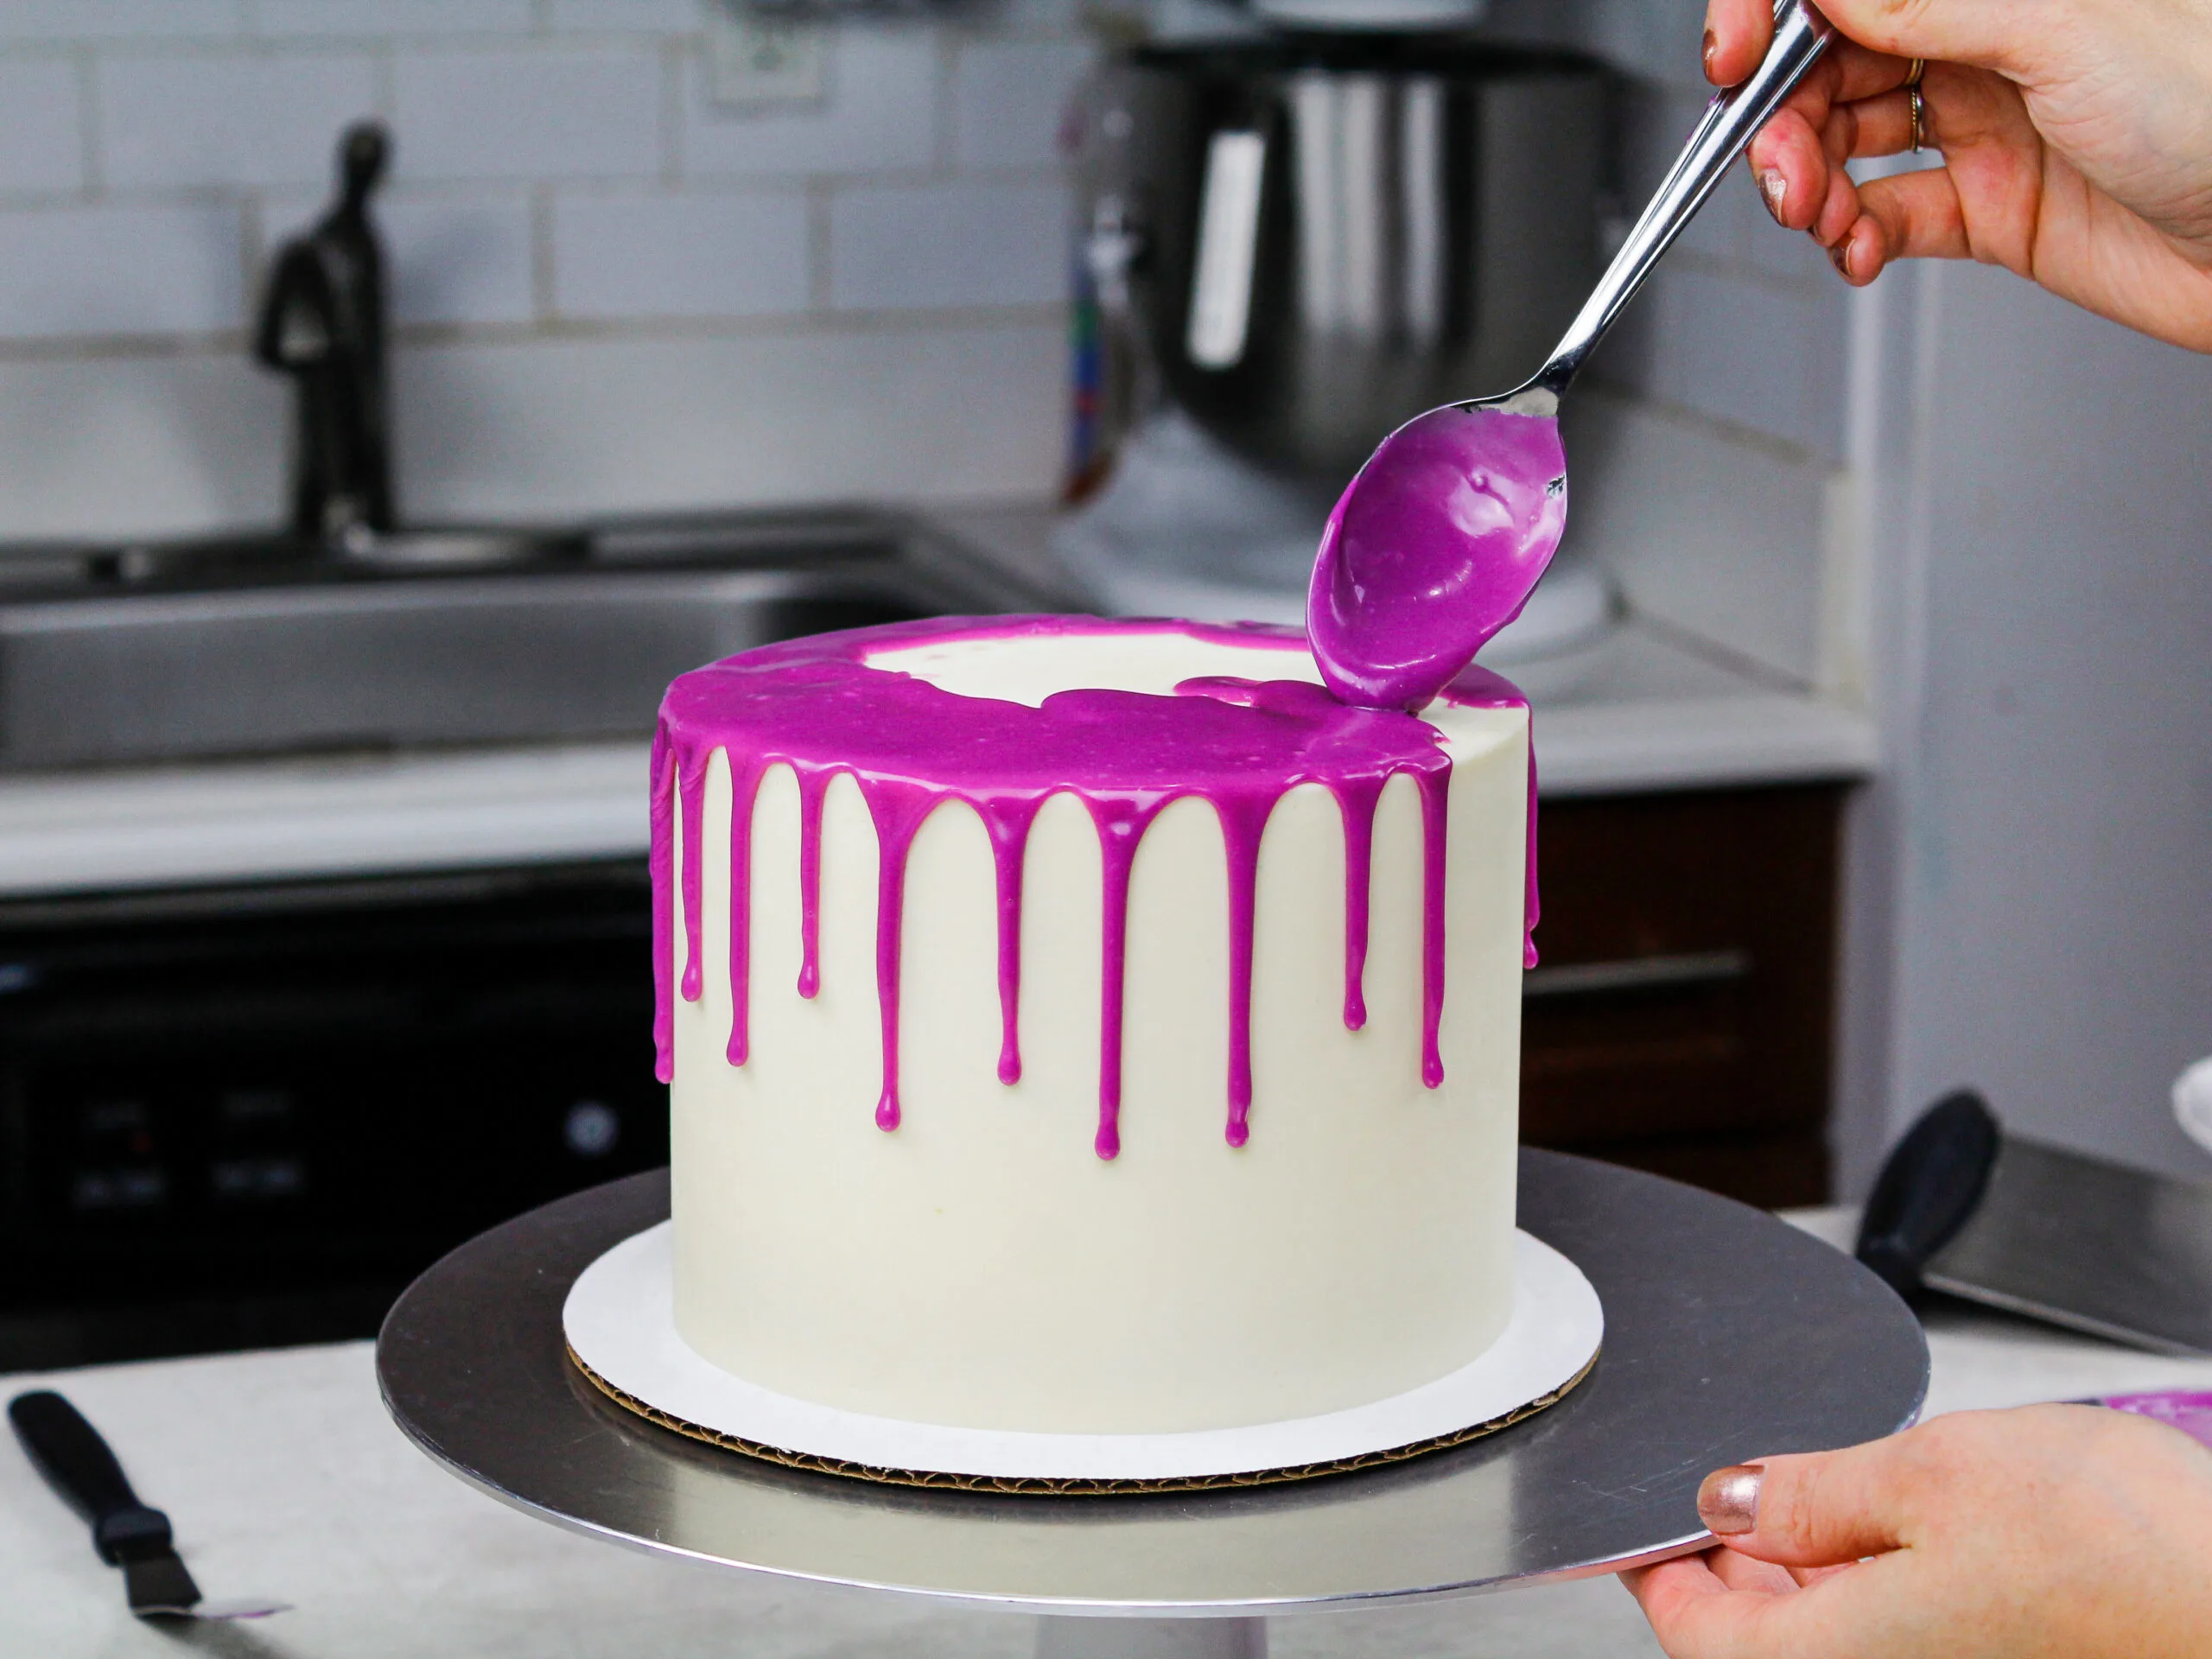 image of white choc ganache drips being added to a chilled buttercream cake to make a purple drip cake